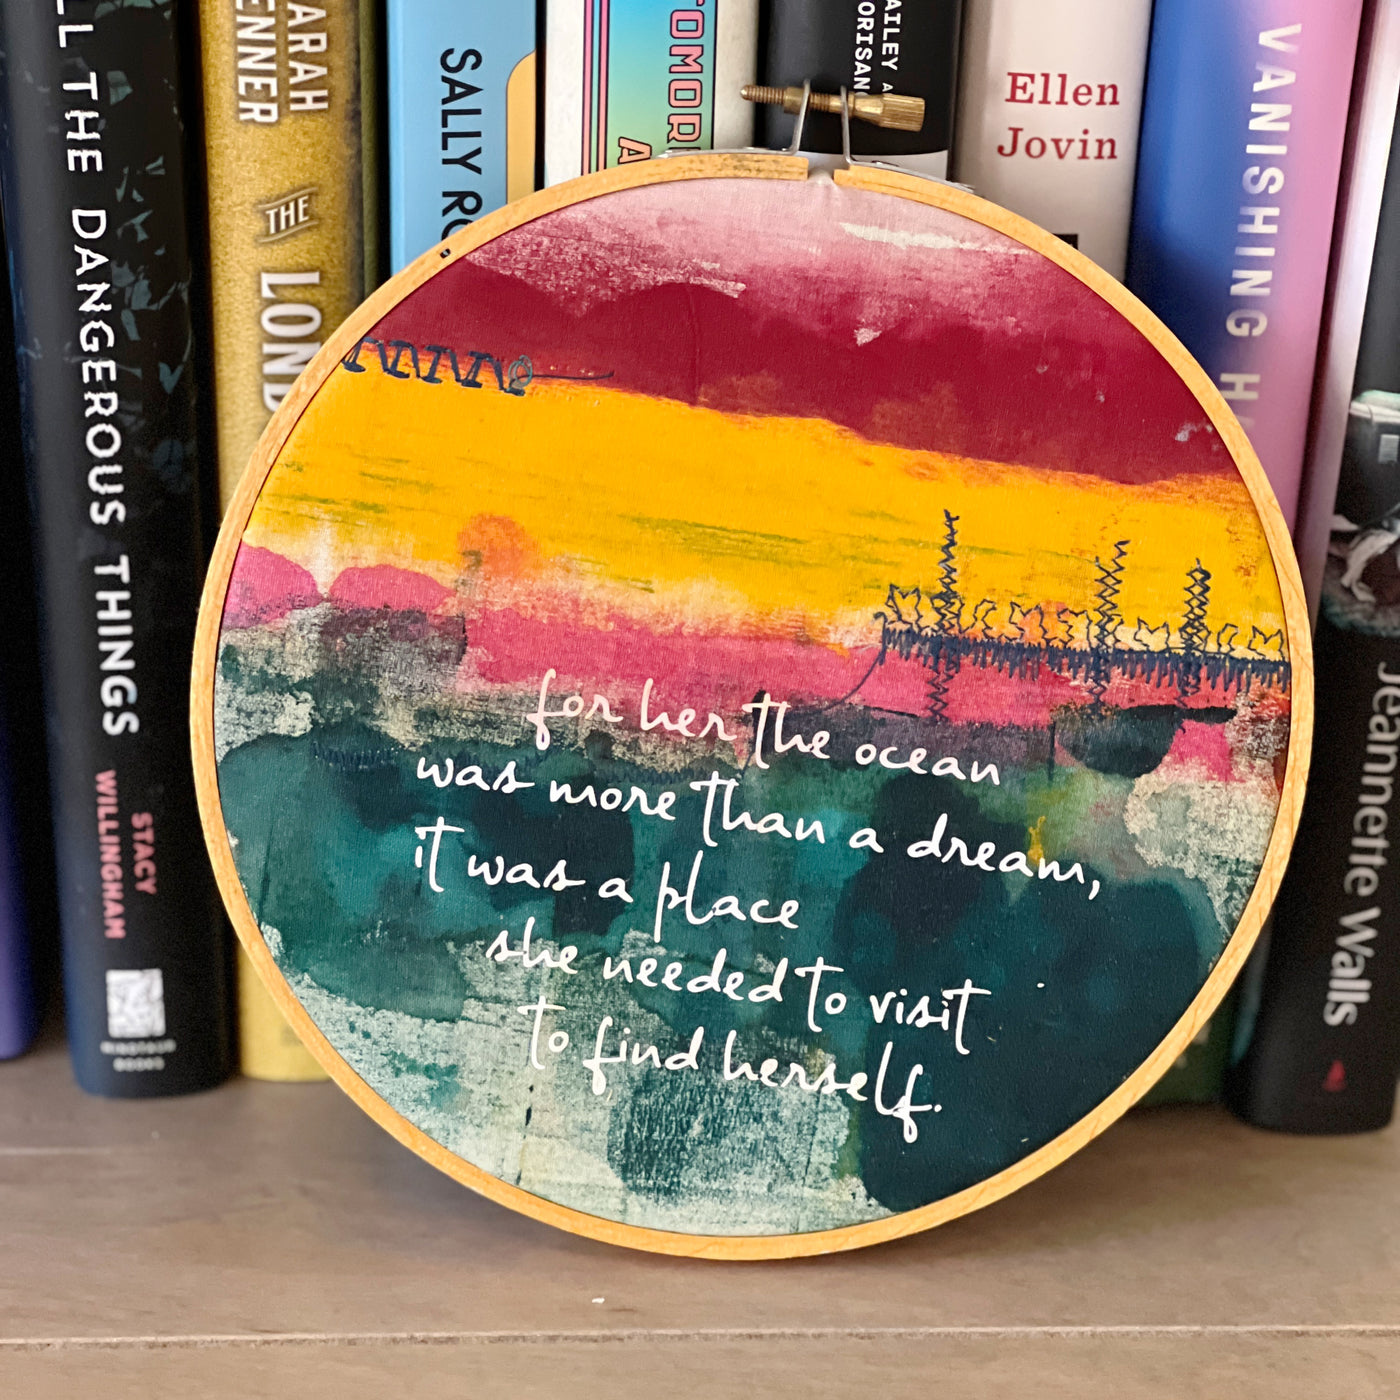 the ocean was more than a dream - painted mixed media hoop art